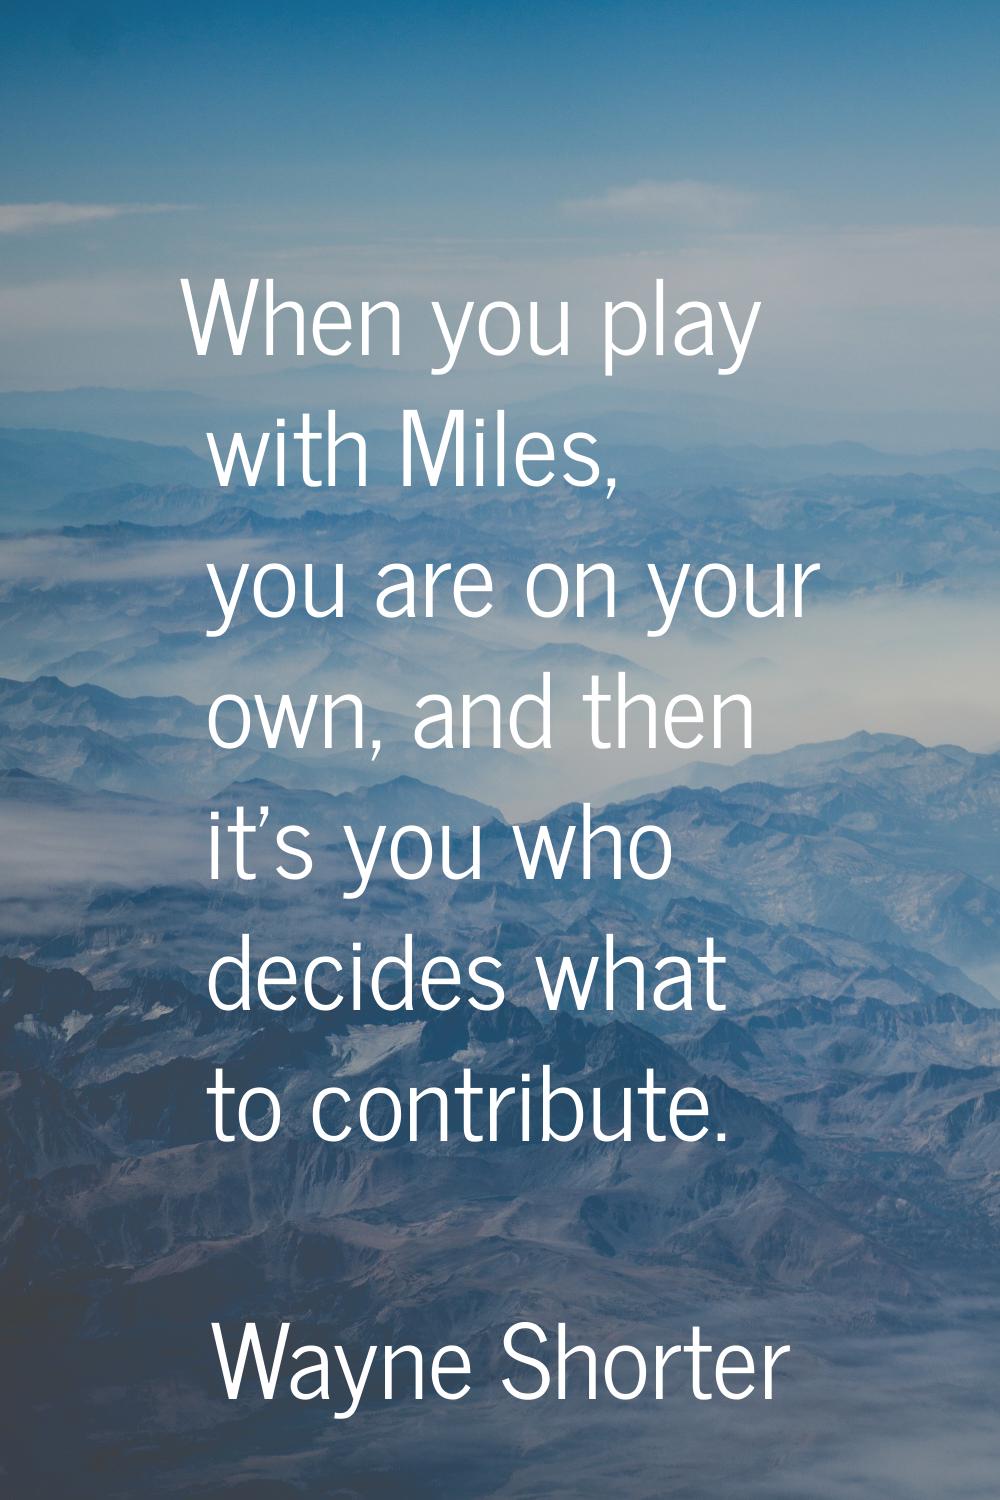 When you play with Miles, you are on your own, and then it's you who decides what to contribute.